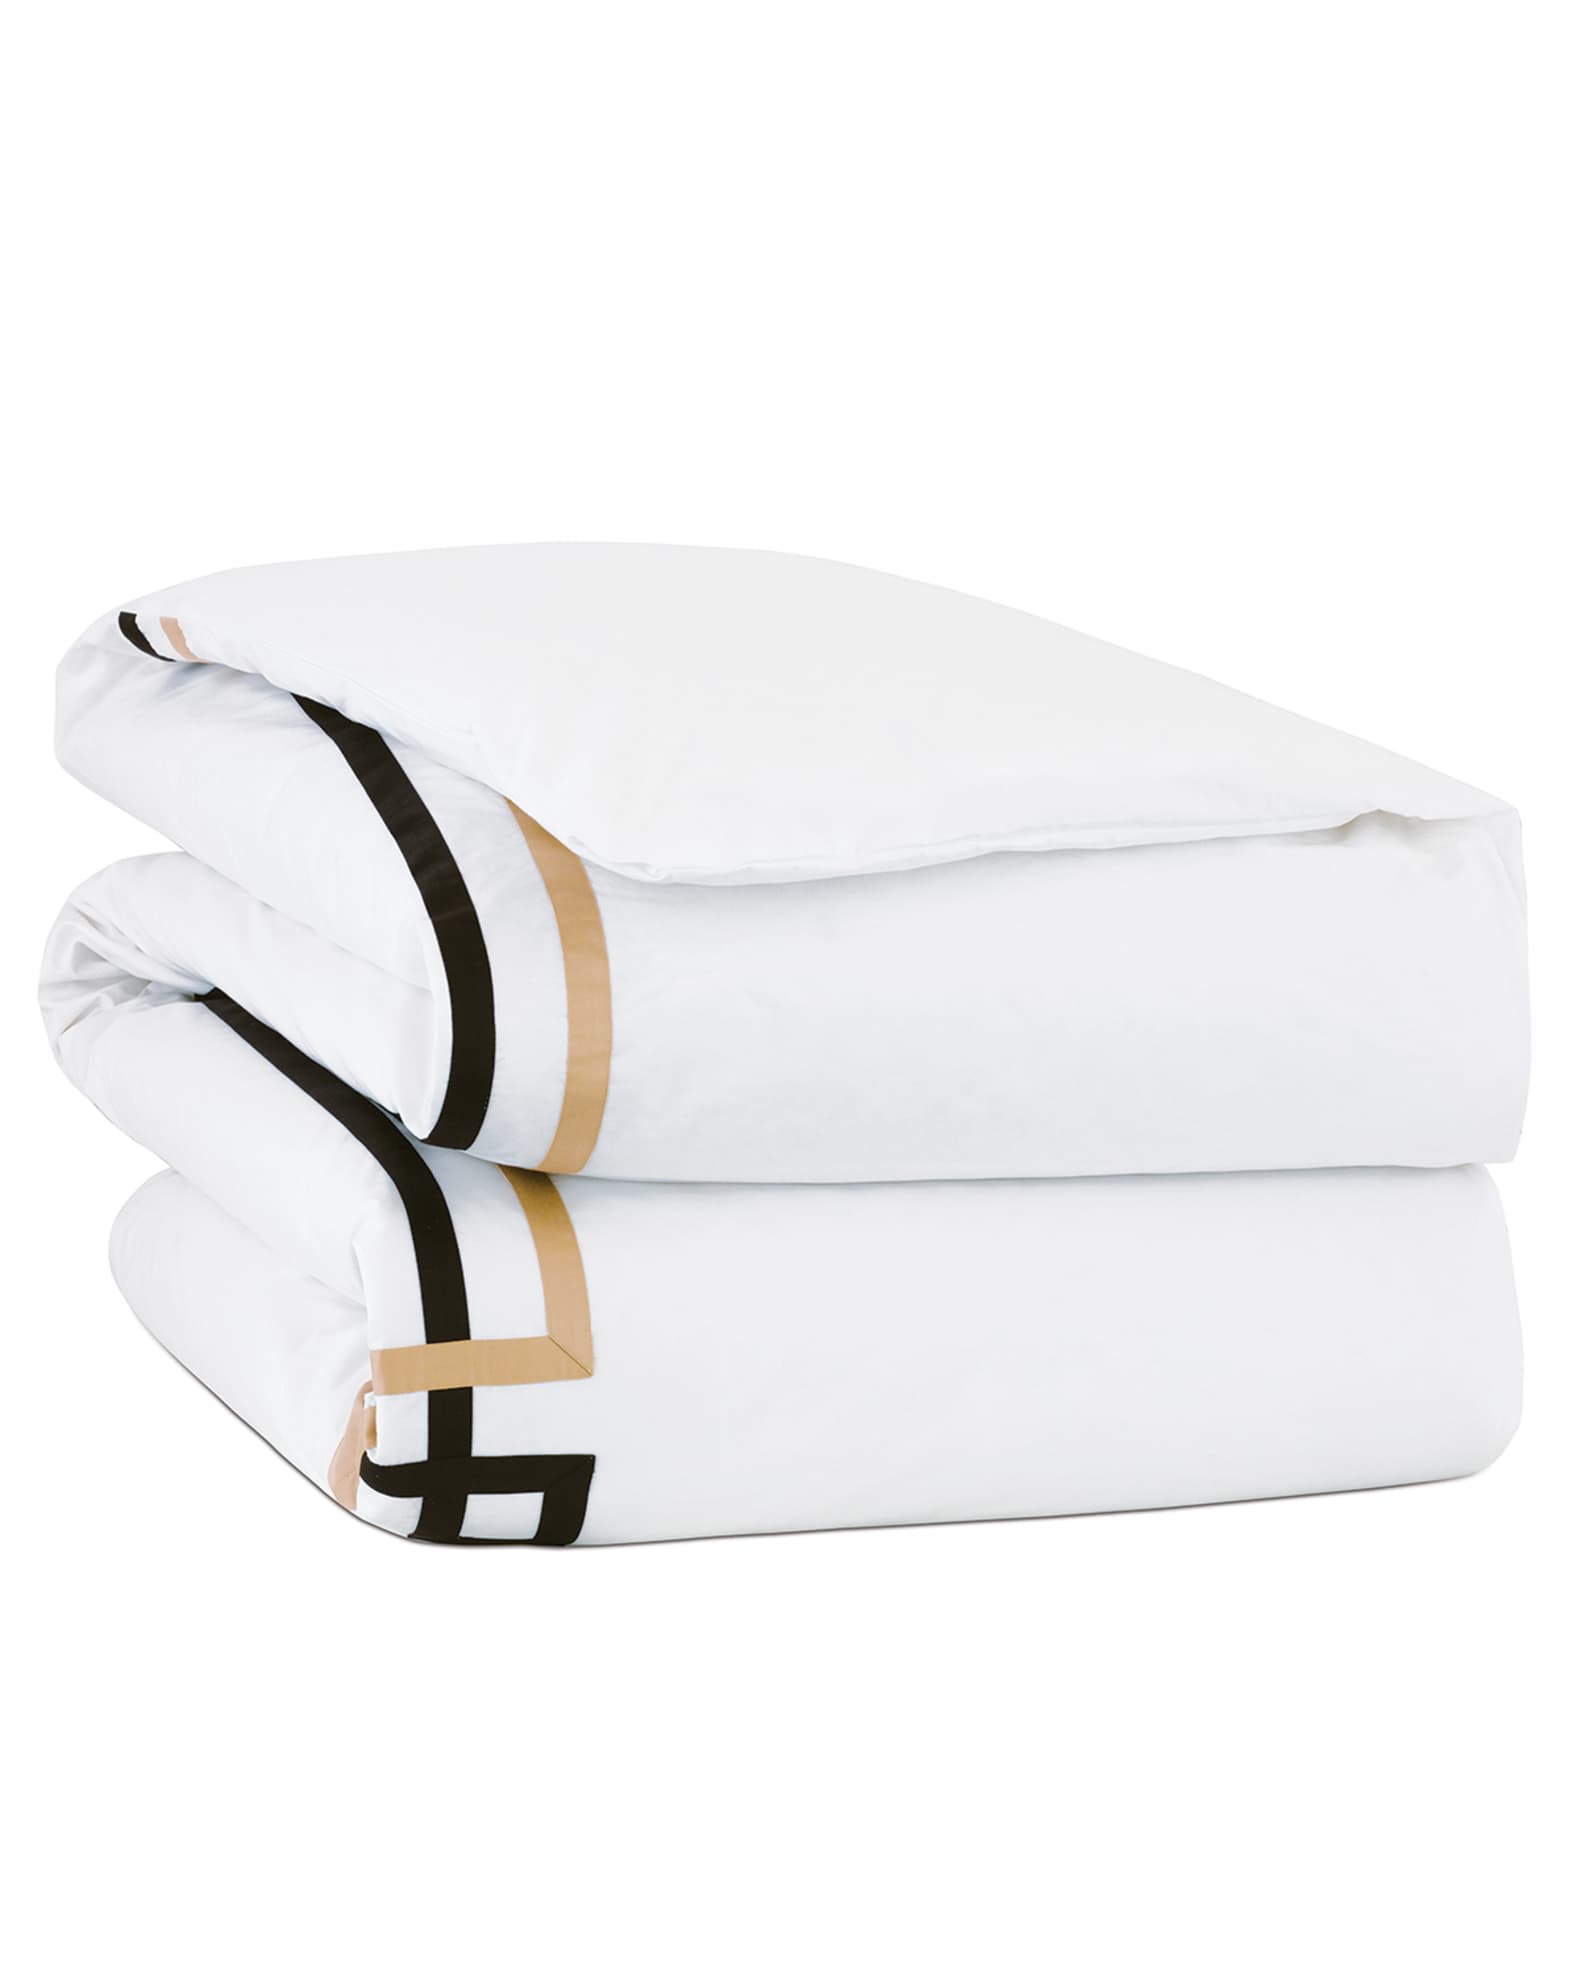 Eastern Accents Luxe Oversized King Duvet